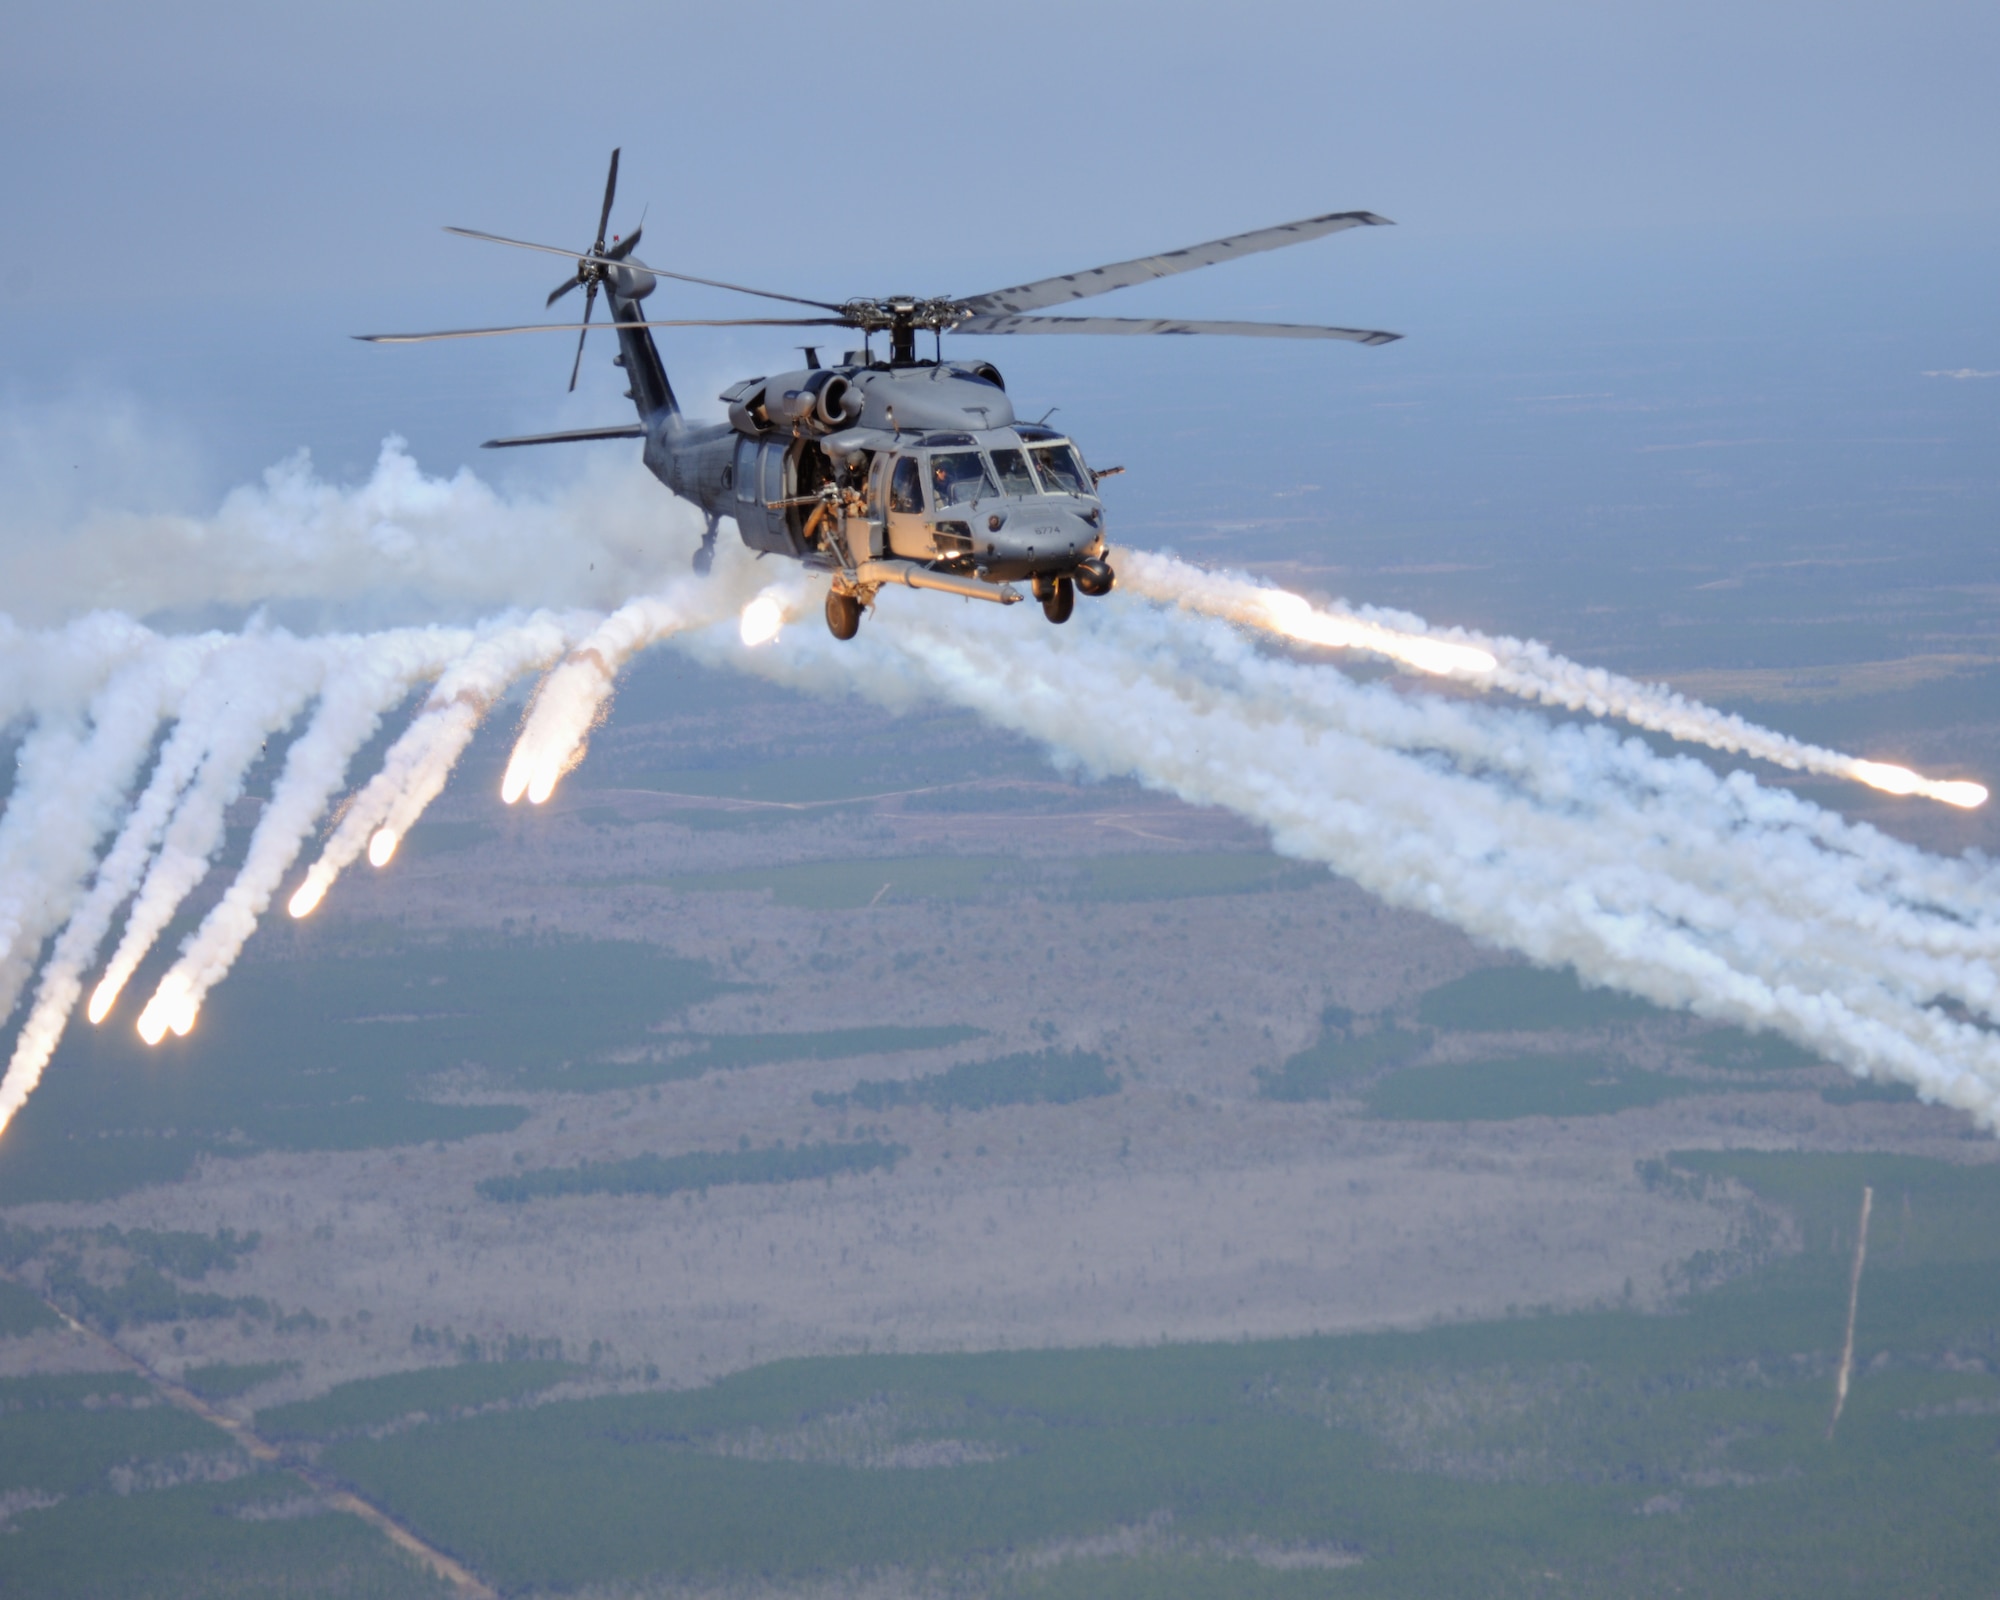 MOODY AIR FORCE BASE, Ga. -- An HH-60G Pave Hawk from the 41st Rescue Squadron empties its remaining flares during an in-flight refueling training session here March 16. Refueling allows the aircraft to travel further in combat situations, allowing essential personnel and equipment to be delivered where needed. (U.S. Air Force photo by Airman 1st Class Benjamin Wiseman/Released)